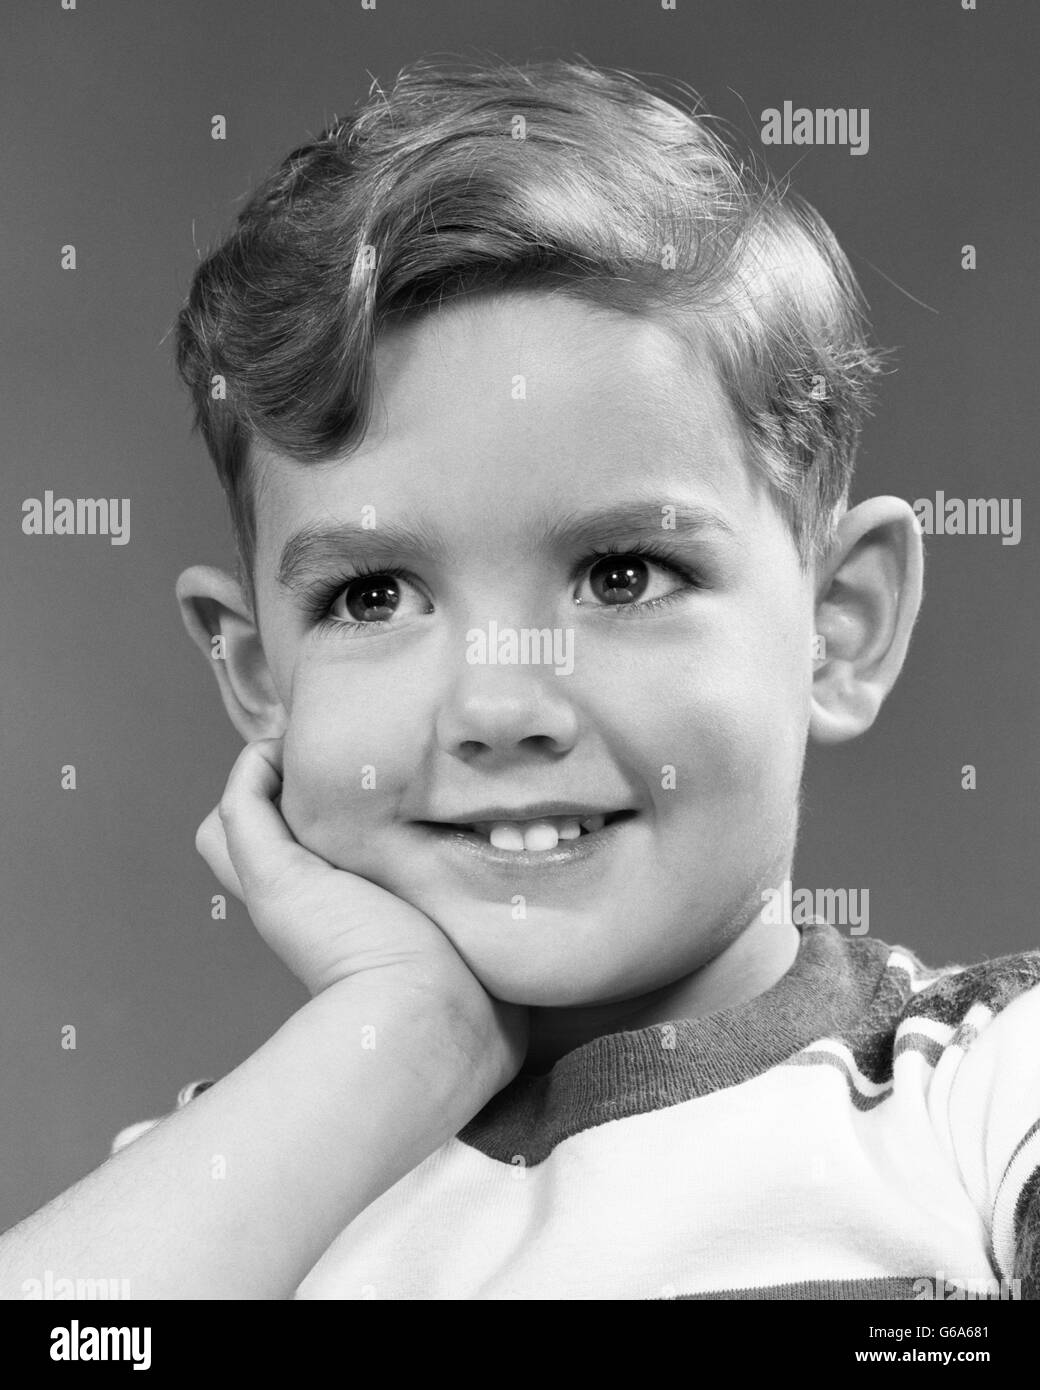 1950s PORTRAIT SMILING BOY LOOKING AT CAMERA FACE RESTING IN HAND Stock Photo